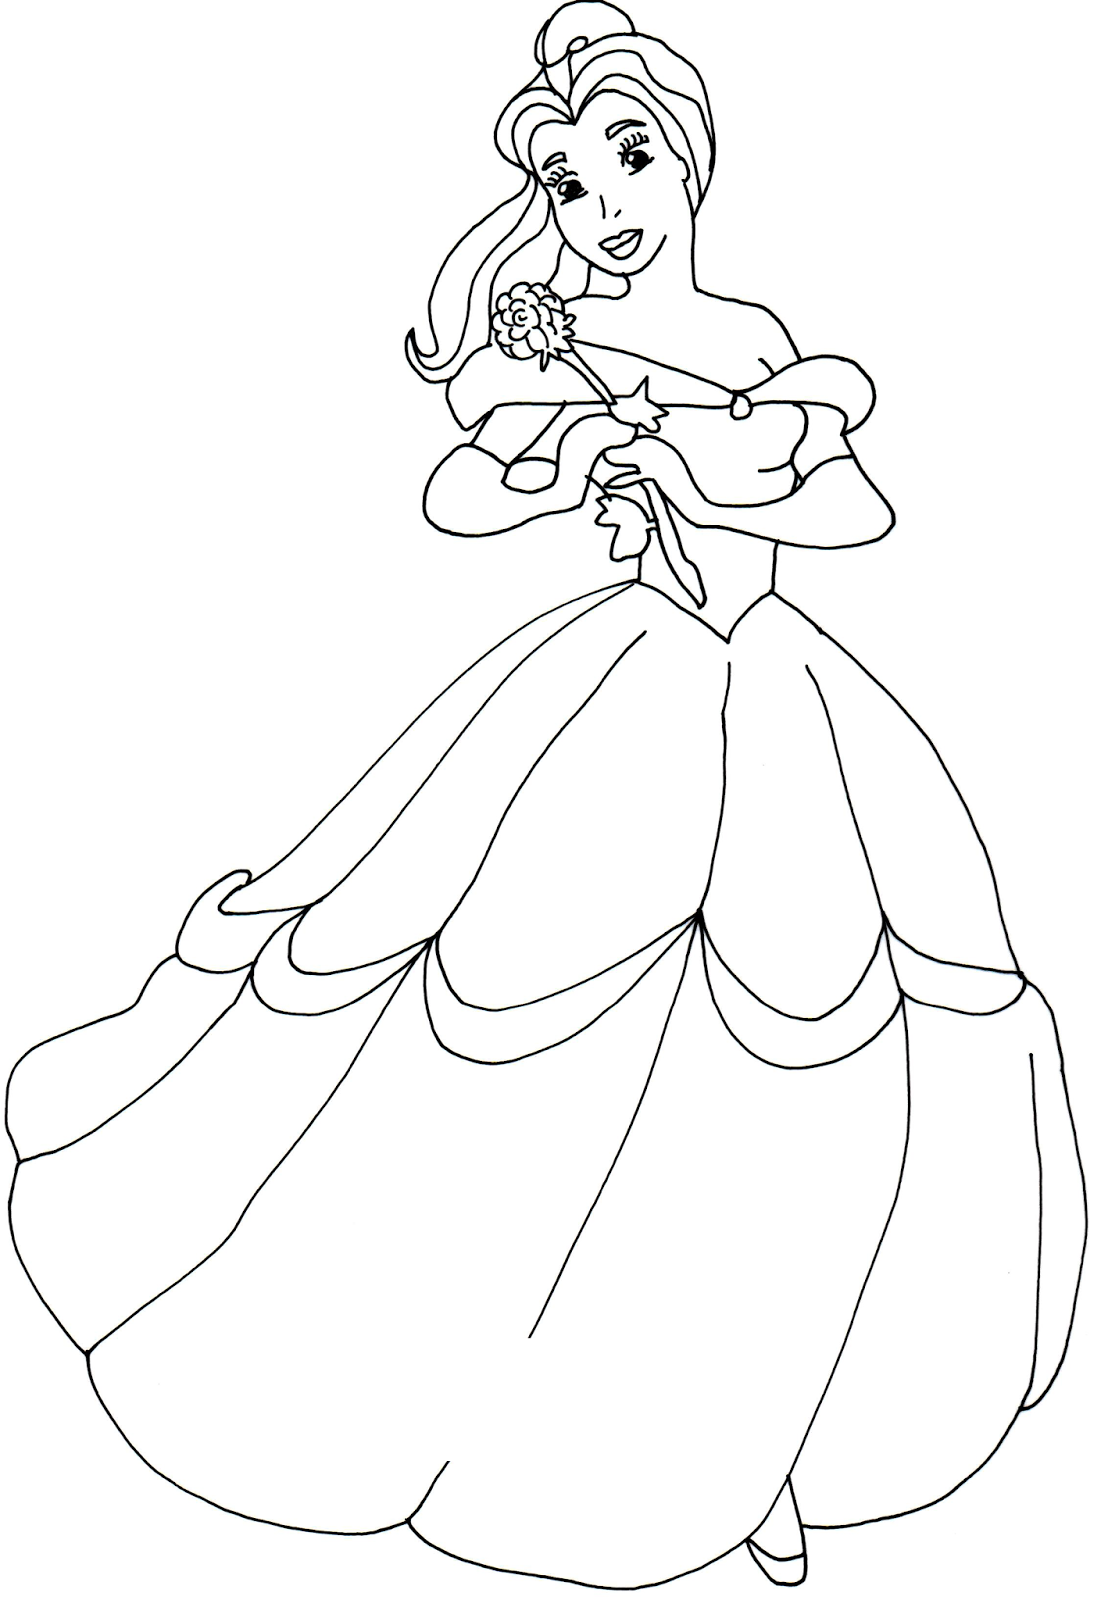 belle coloring pages to print at getdrawings | free download